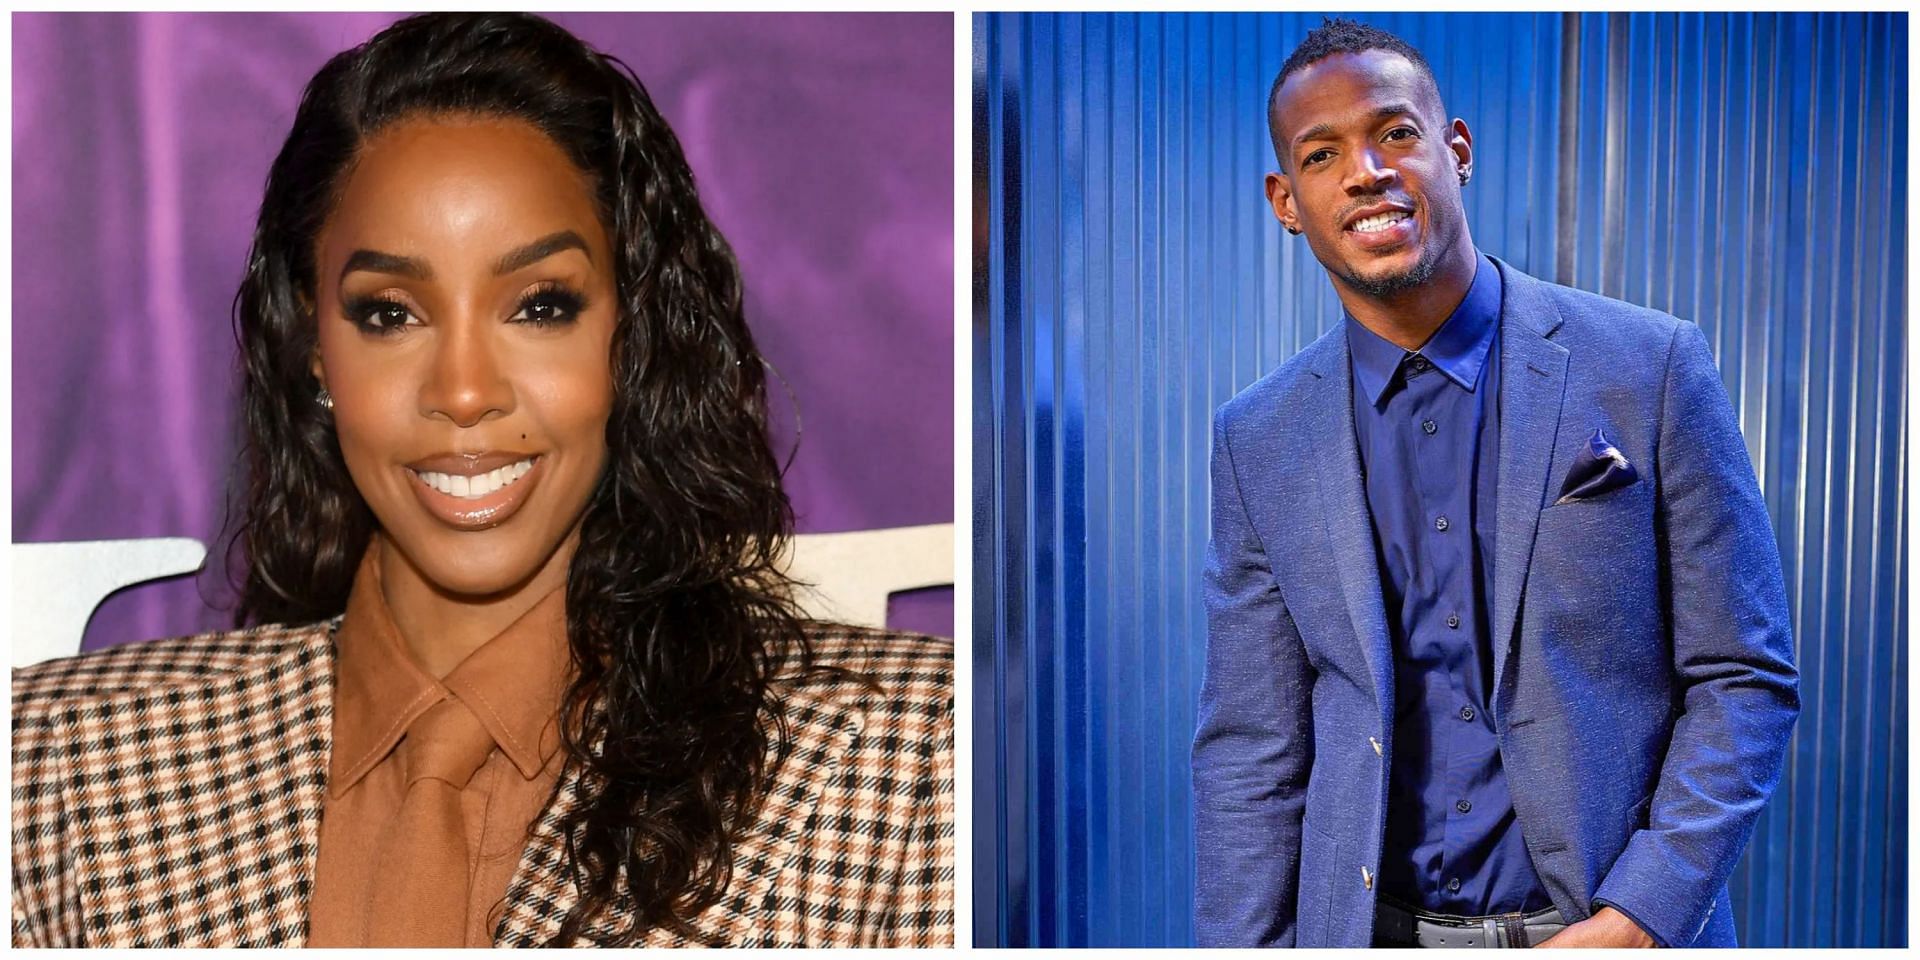 Social media users praise Marlom as he jumps in support of Kelly after the alleged Today show fiasco. (Image via @MarlonWayans &amp; KellyRowland/ Instagram)